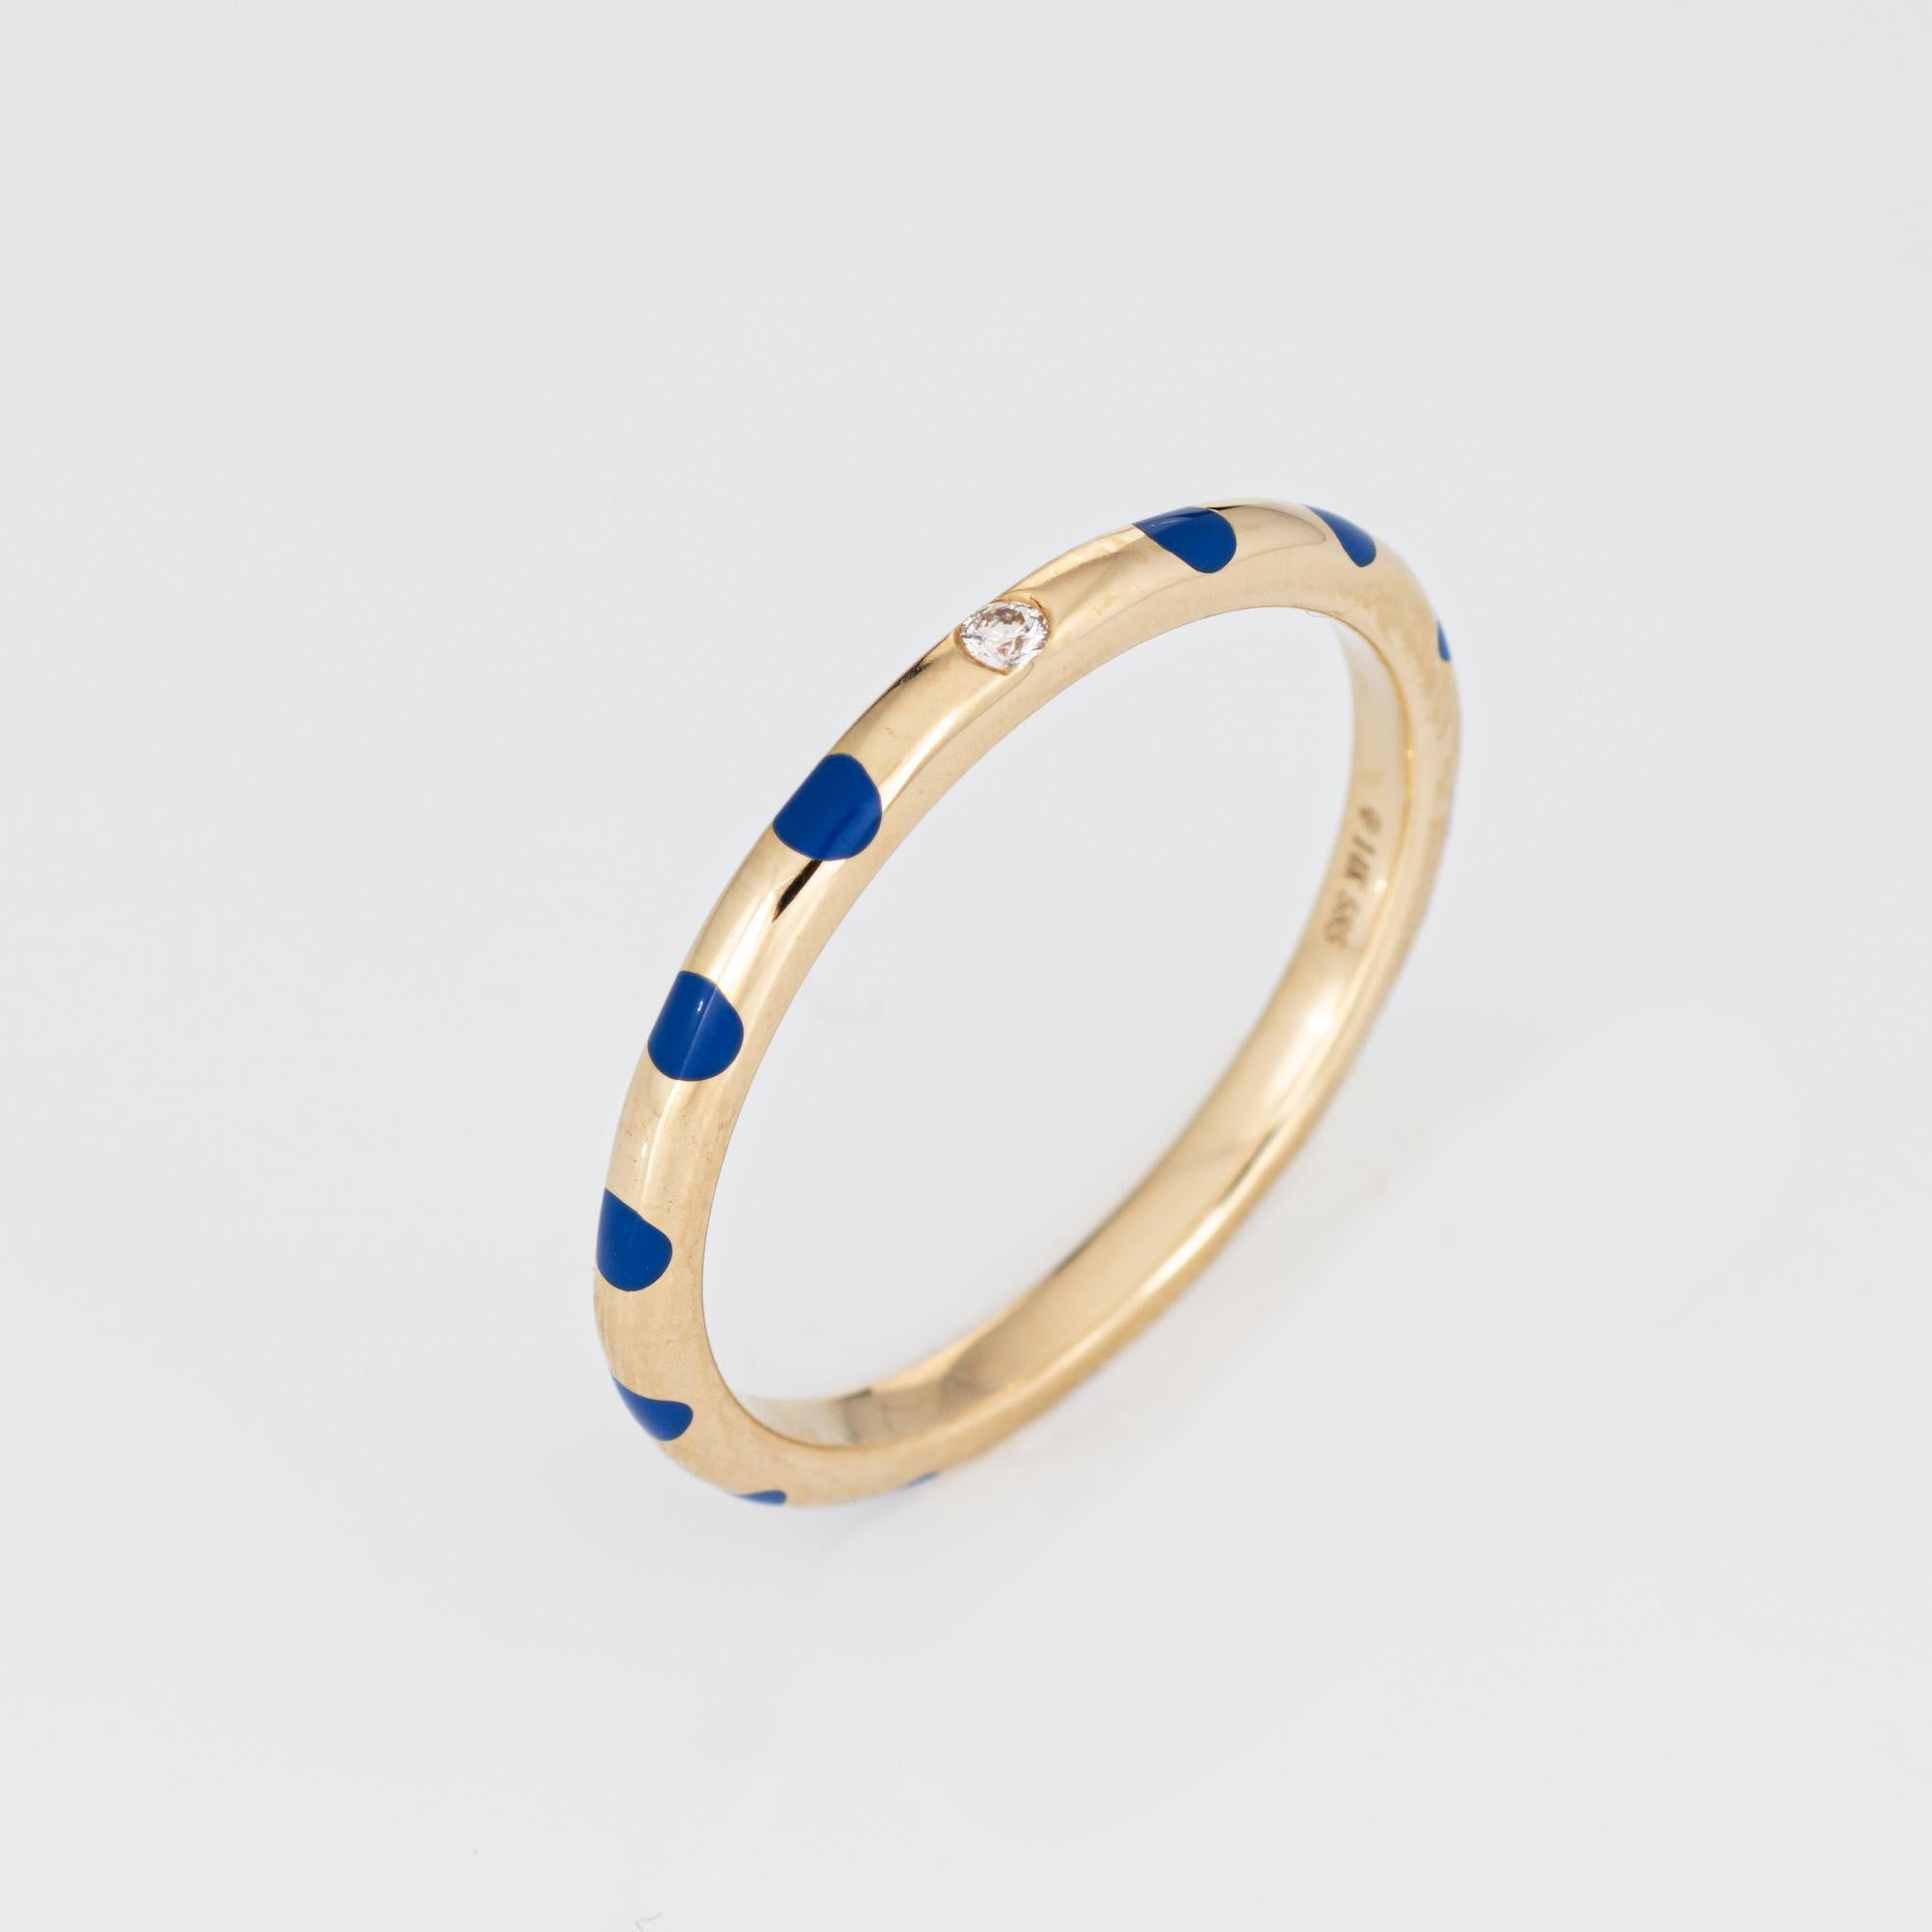 Stylish blue polka dot enamel & diamond stacking band crafted in 14 karat yellow gold. 

1 round brilliant diamond is estimated 0.02 carats (estimated at H-I color and SI2 clarity). 

The enameled polka dot band is set with a small diamond. The low